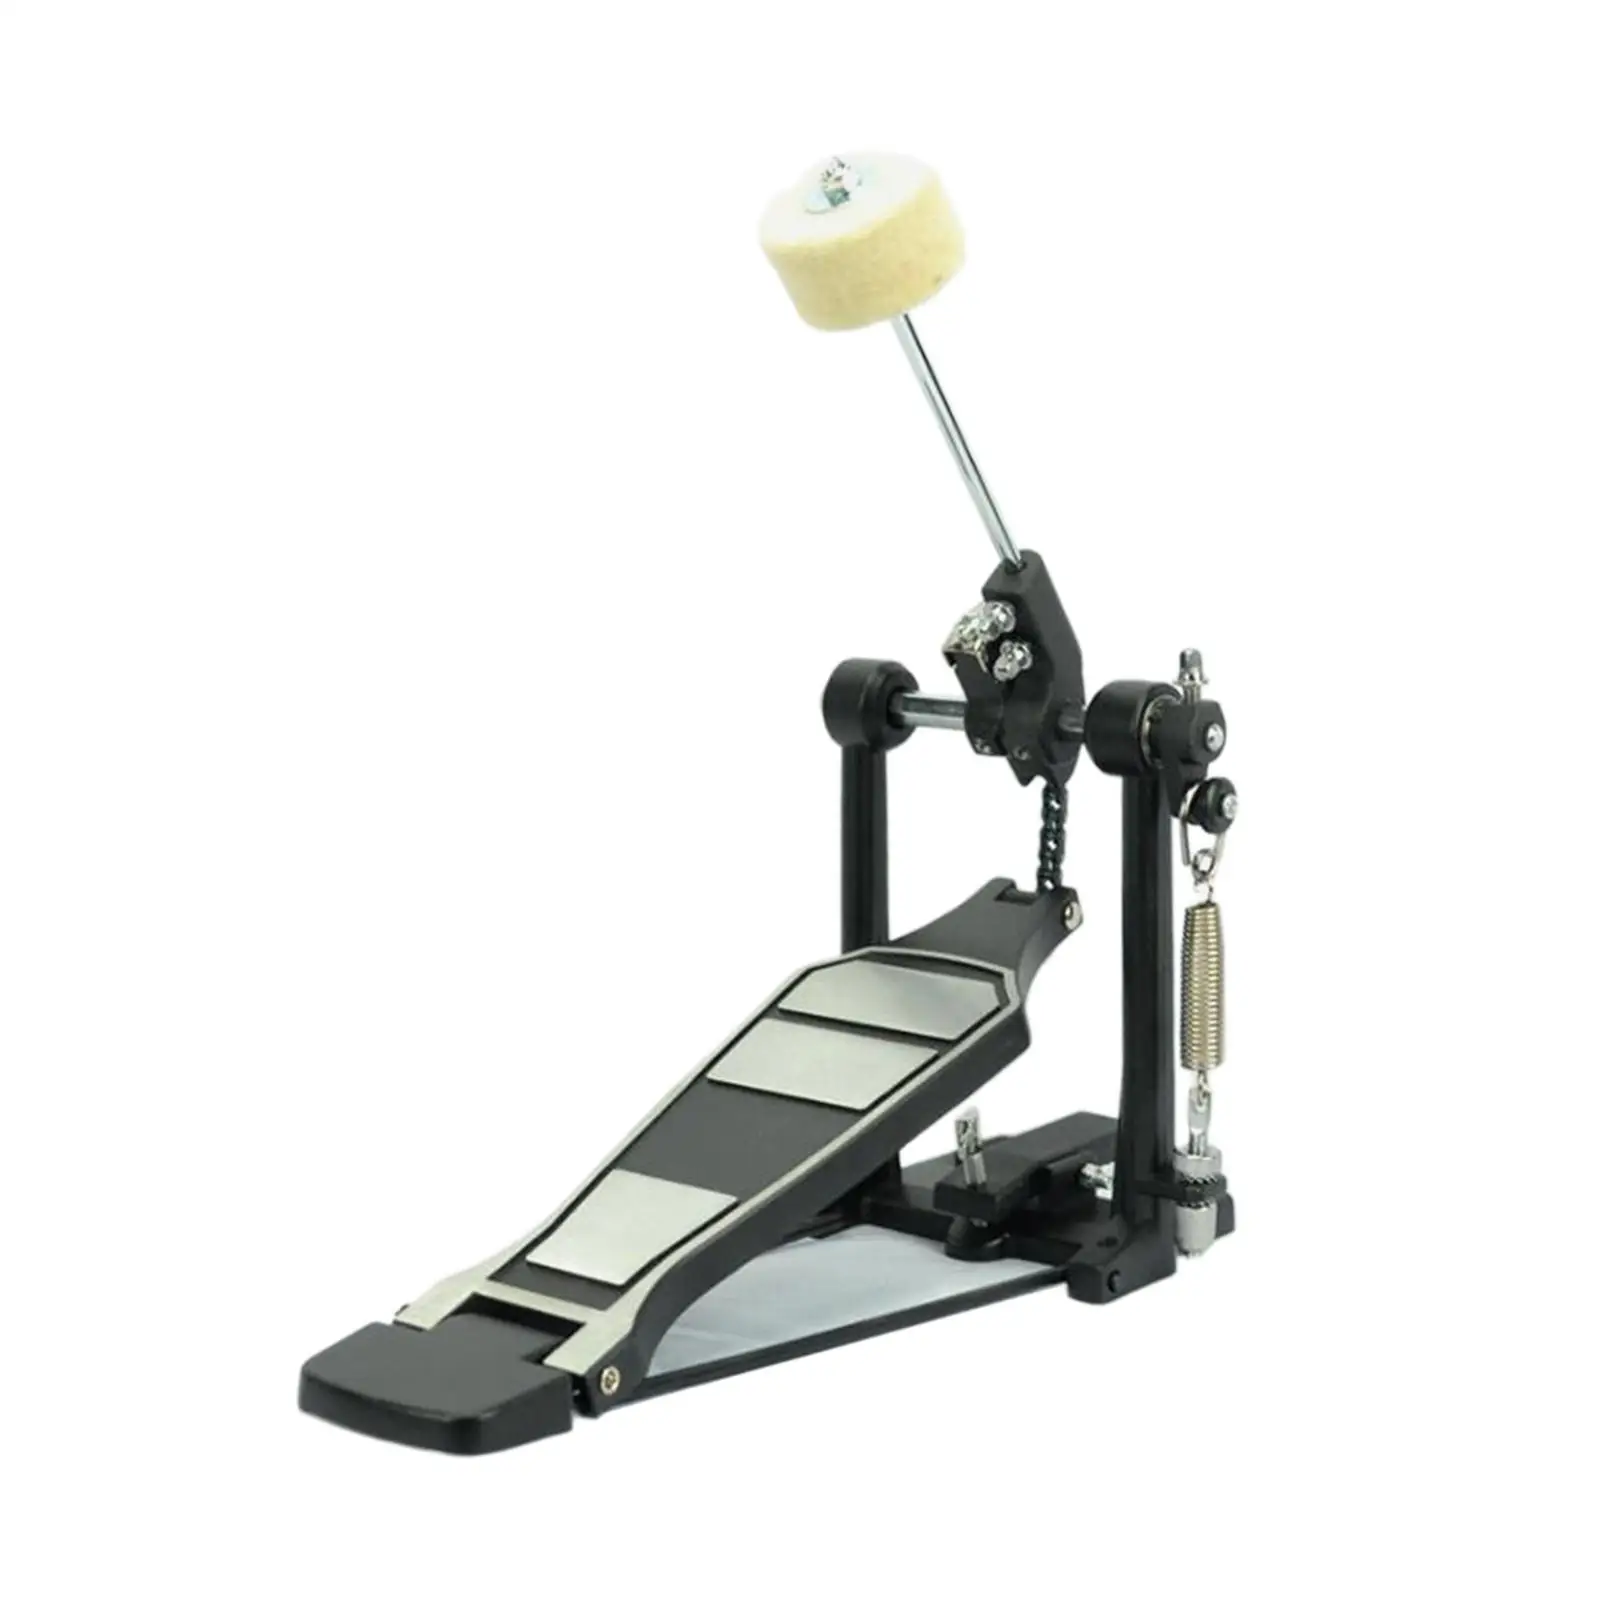 Bass Drum Pedal Portable Stable Chain Drive Drum Step for Drum Set Instrument for Electronic Drums Drum Foot Pedal Beater